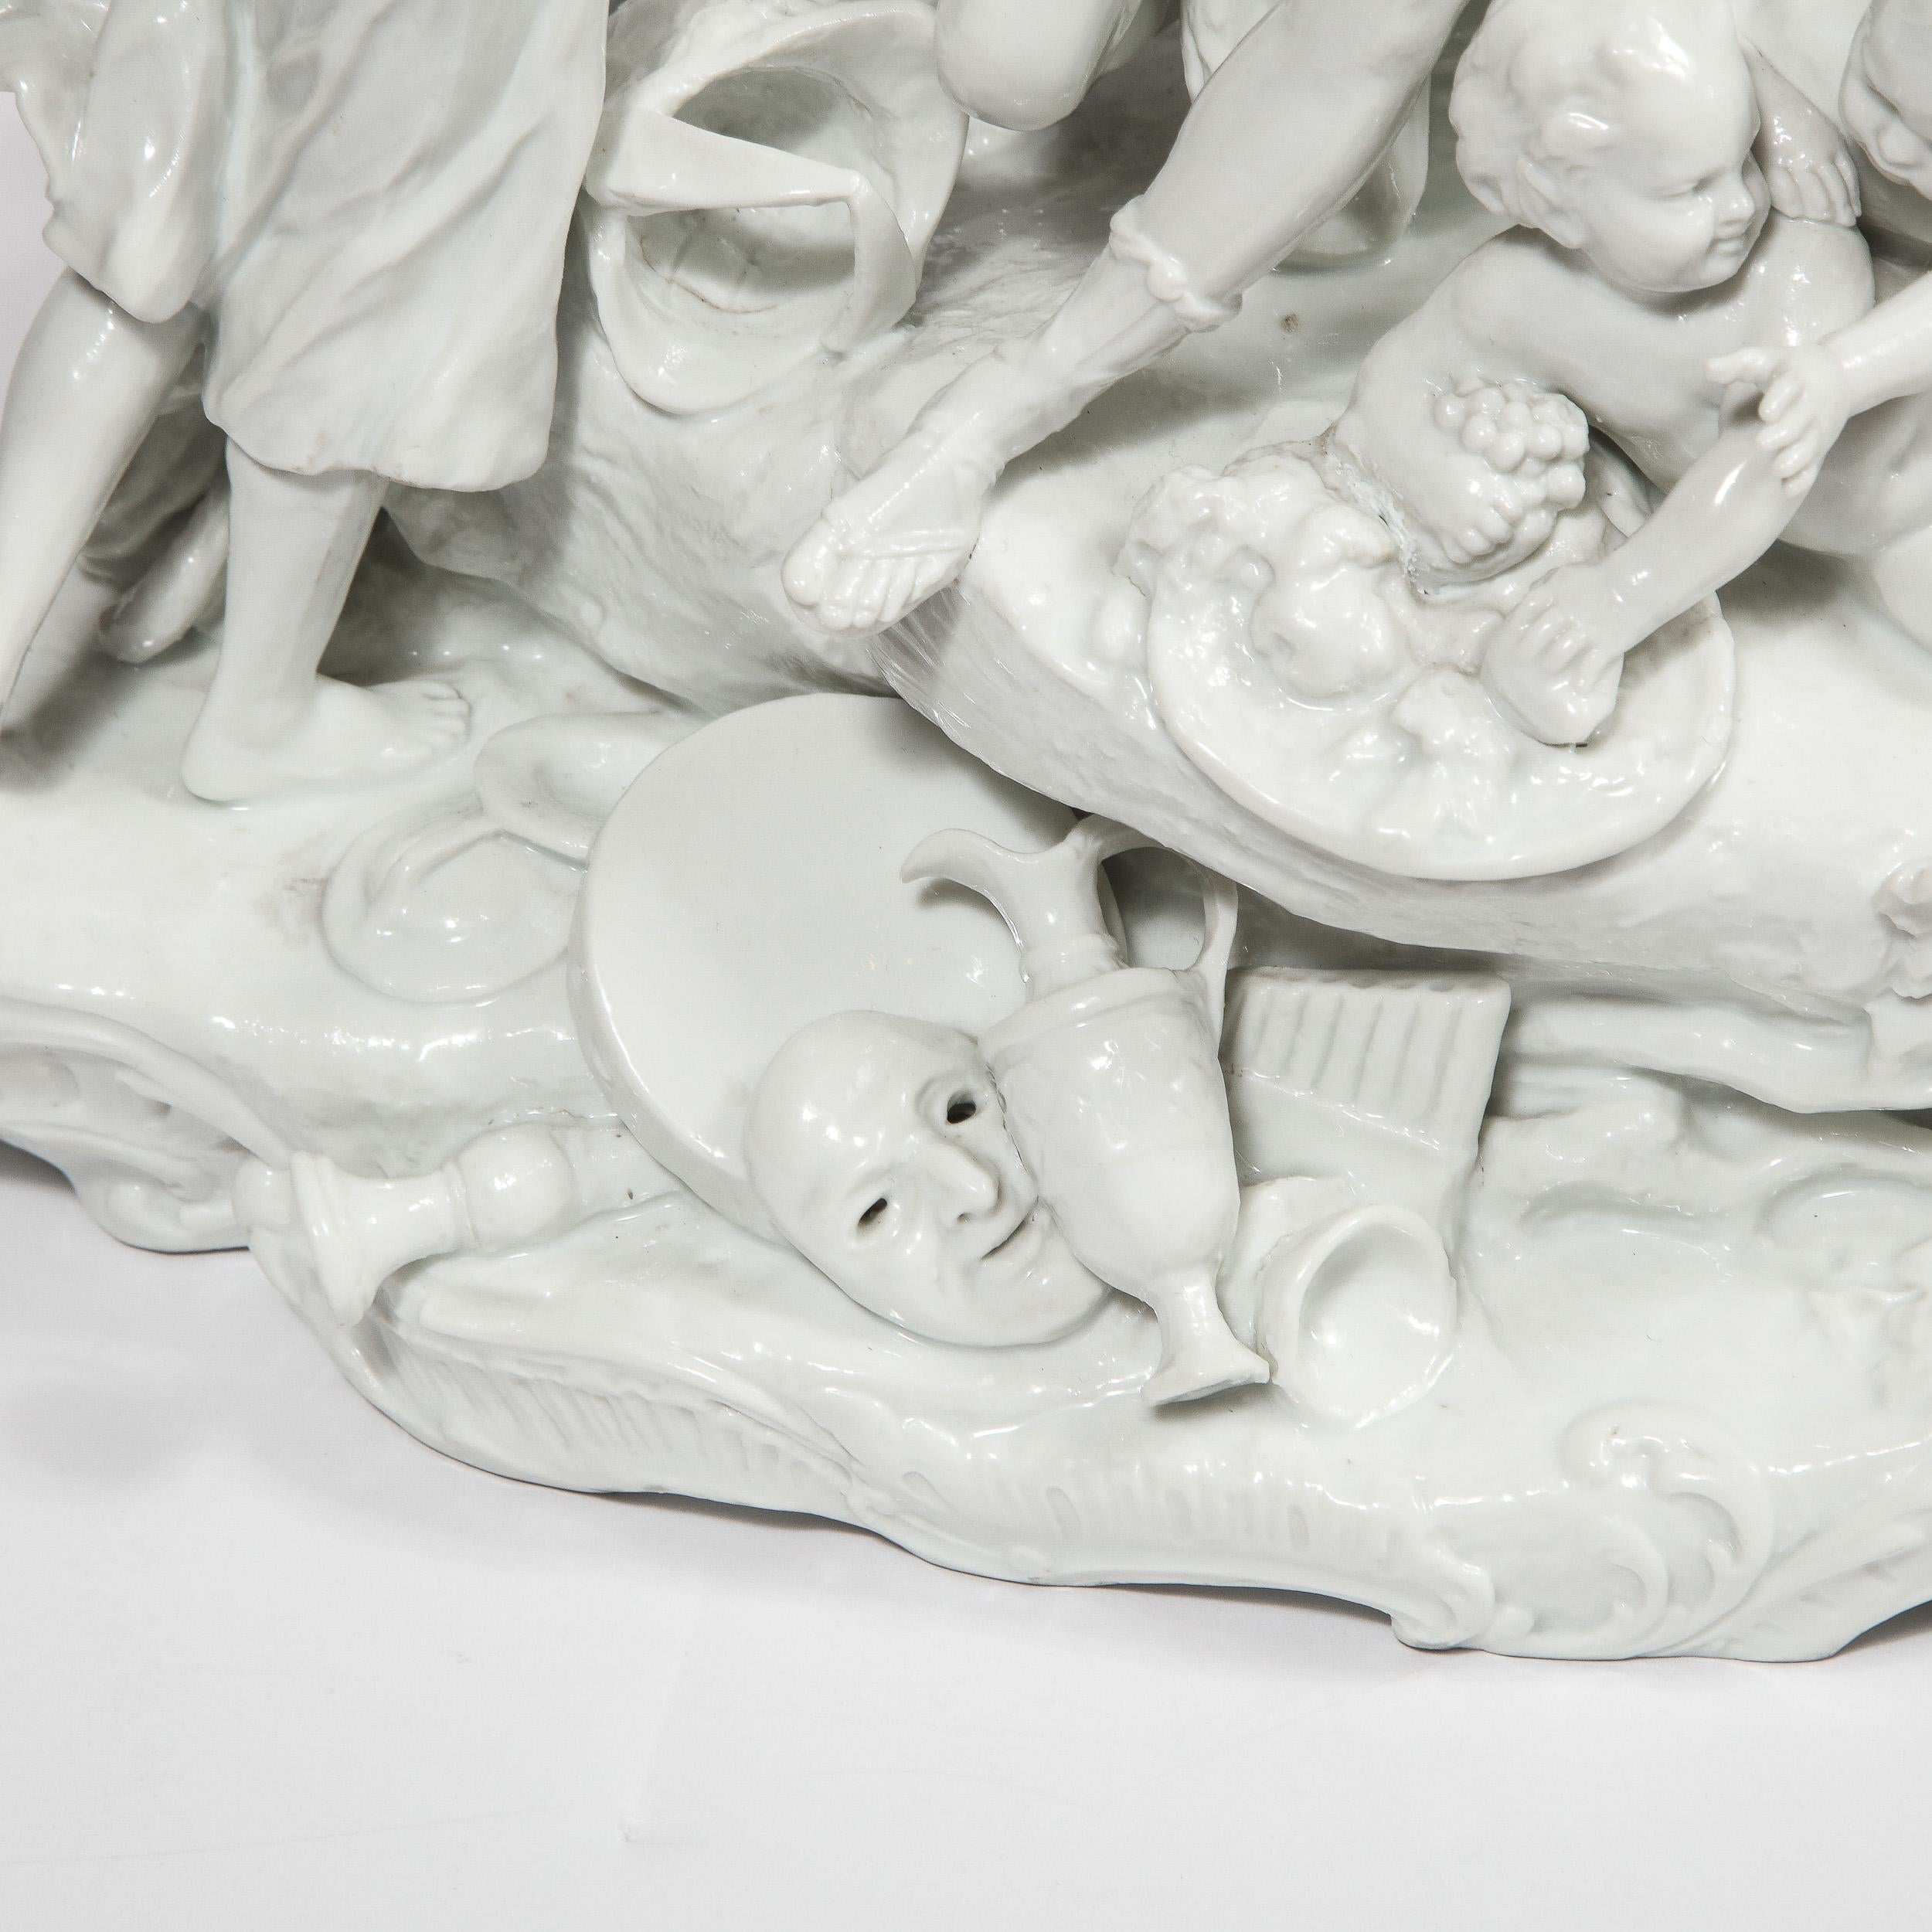 This refined modernist neoclassical sculpture was realized in Germany. The piece depicts a bacchanal featuring Greek goddesses; young cherubic children; and even a bear, executed in fine white bisque porcelain. With its timeless and chic aesthetic,